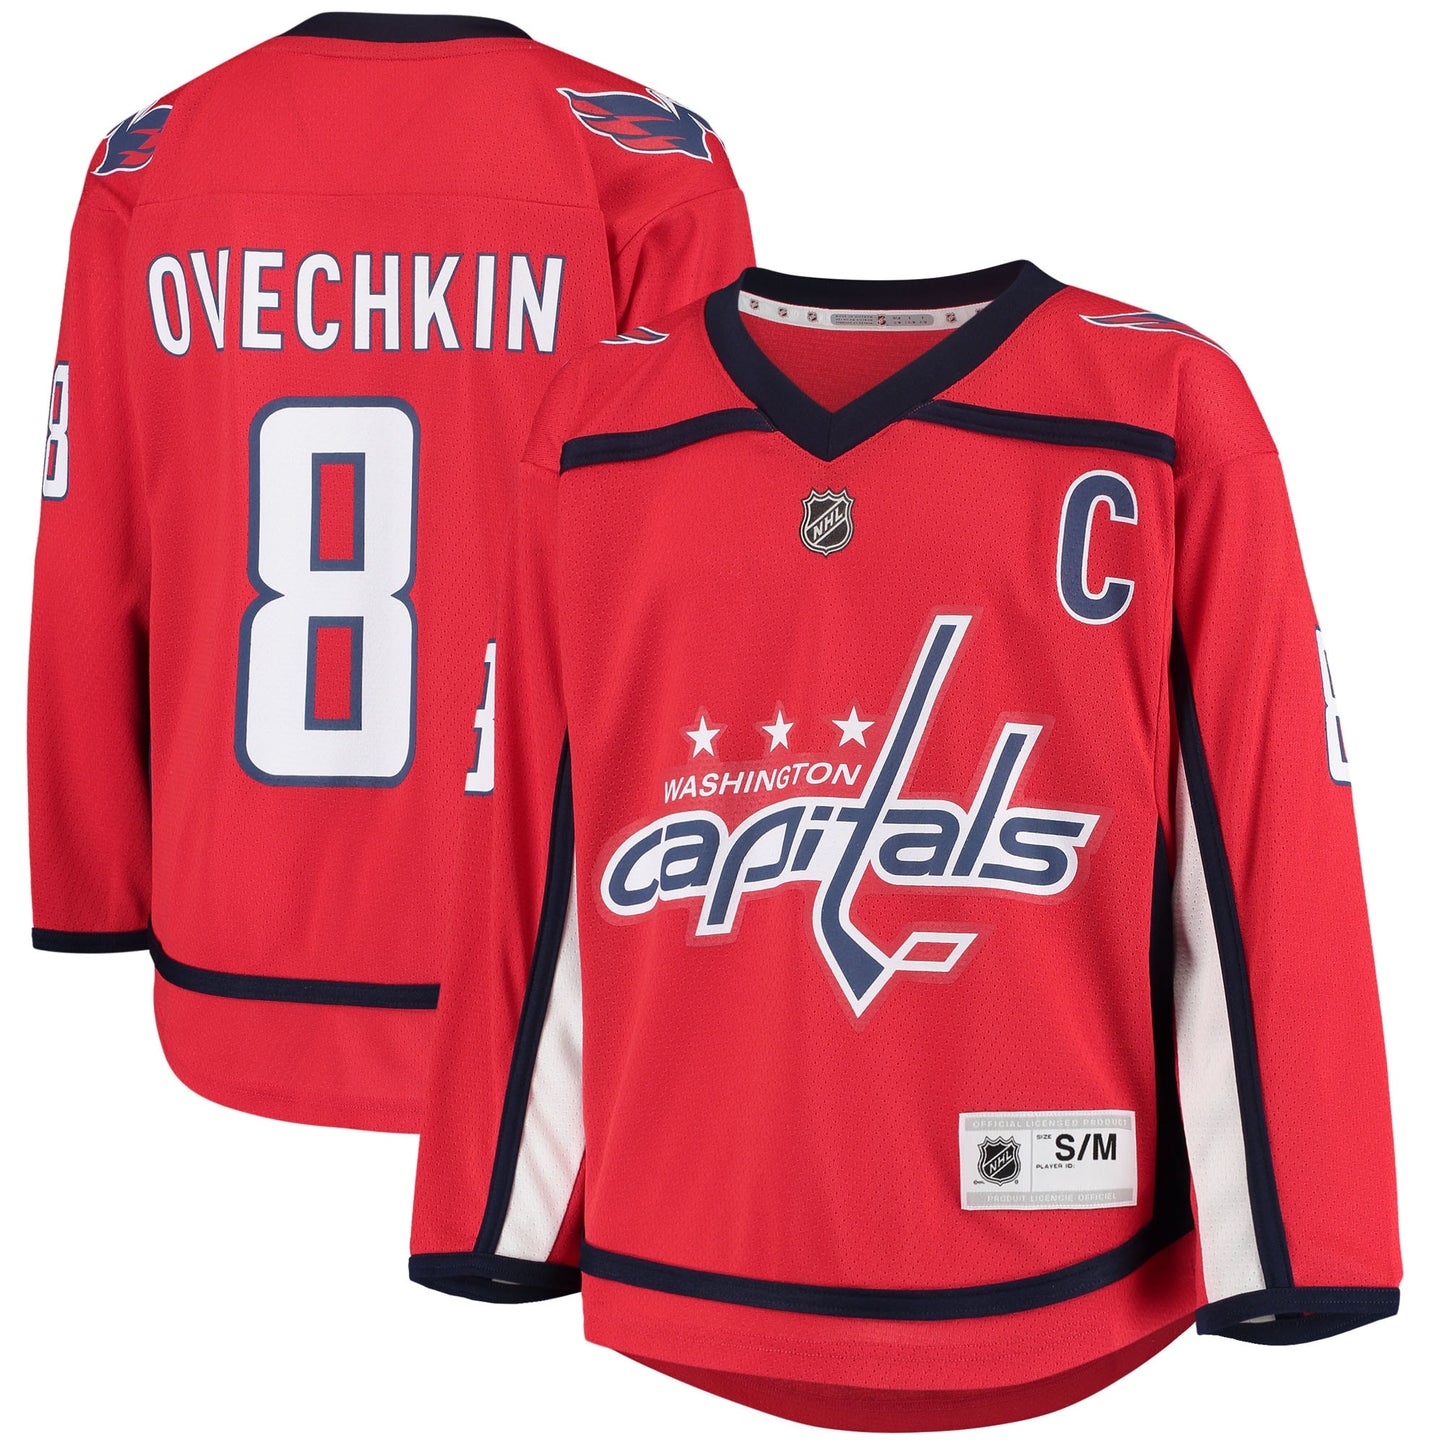 Alexander Ovechkin Washington Capitals Youth Home Replica Player Jersey - Red